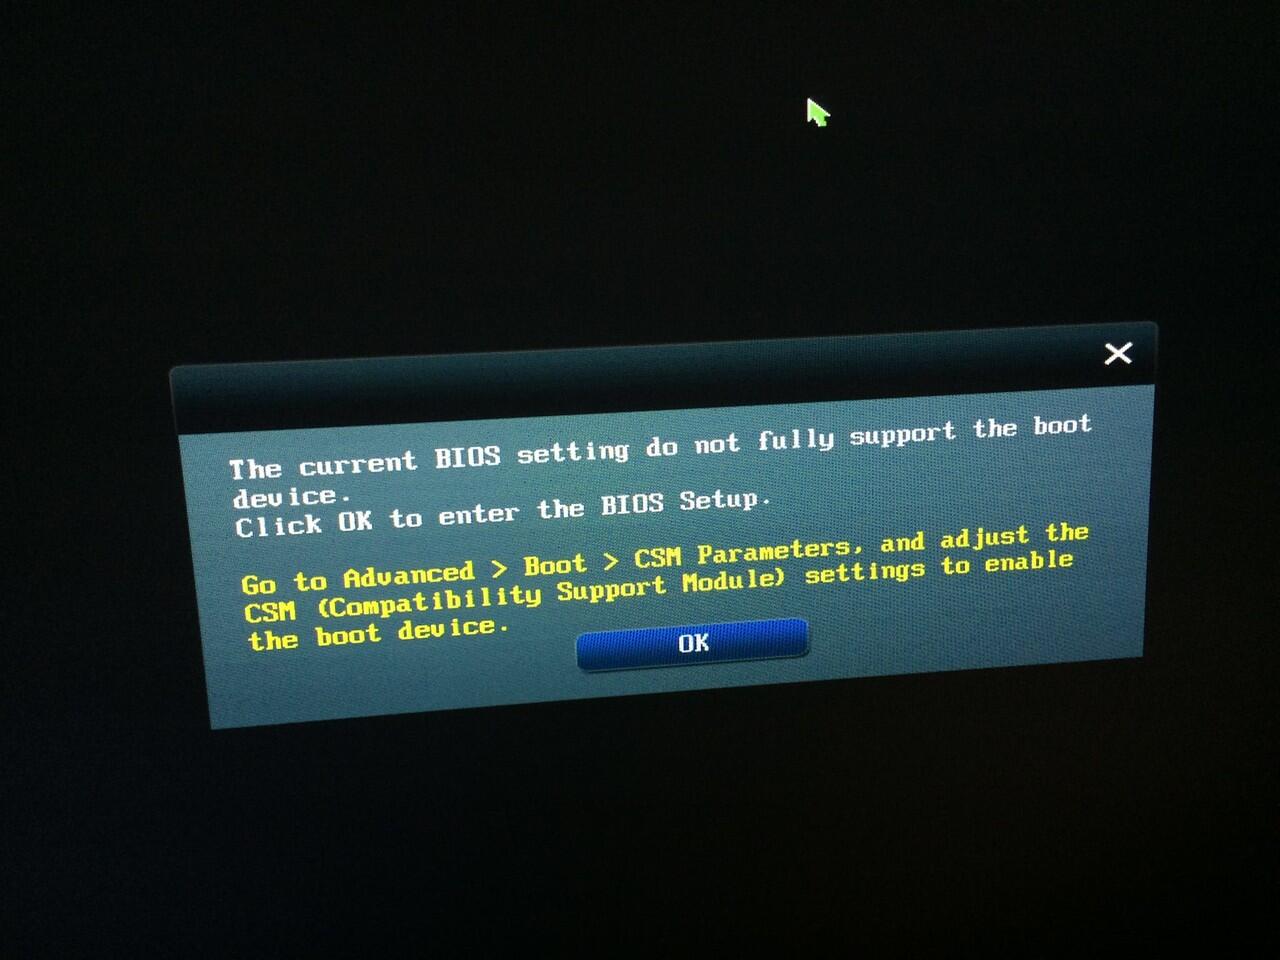 Could not initialize proxy. Беспроводная сеть в биос. The current BIOS setting do not fully support the Boot device.